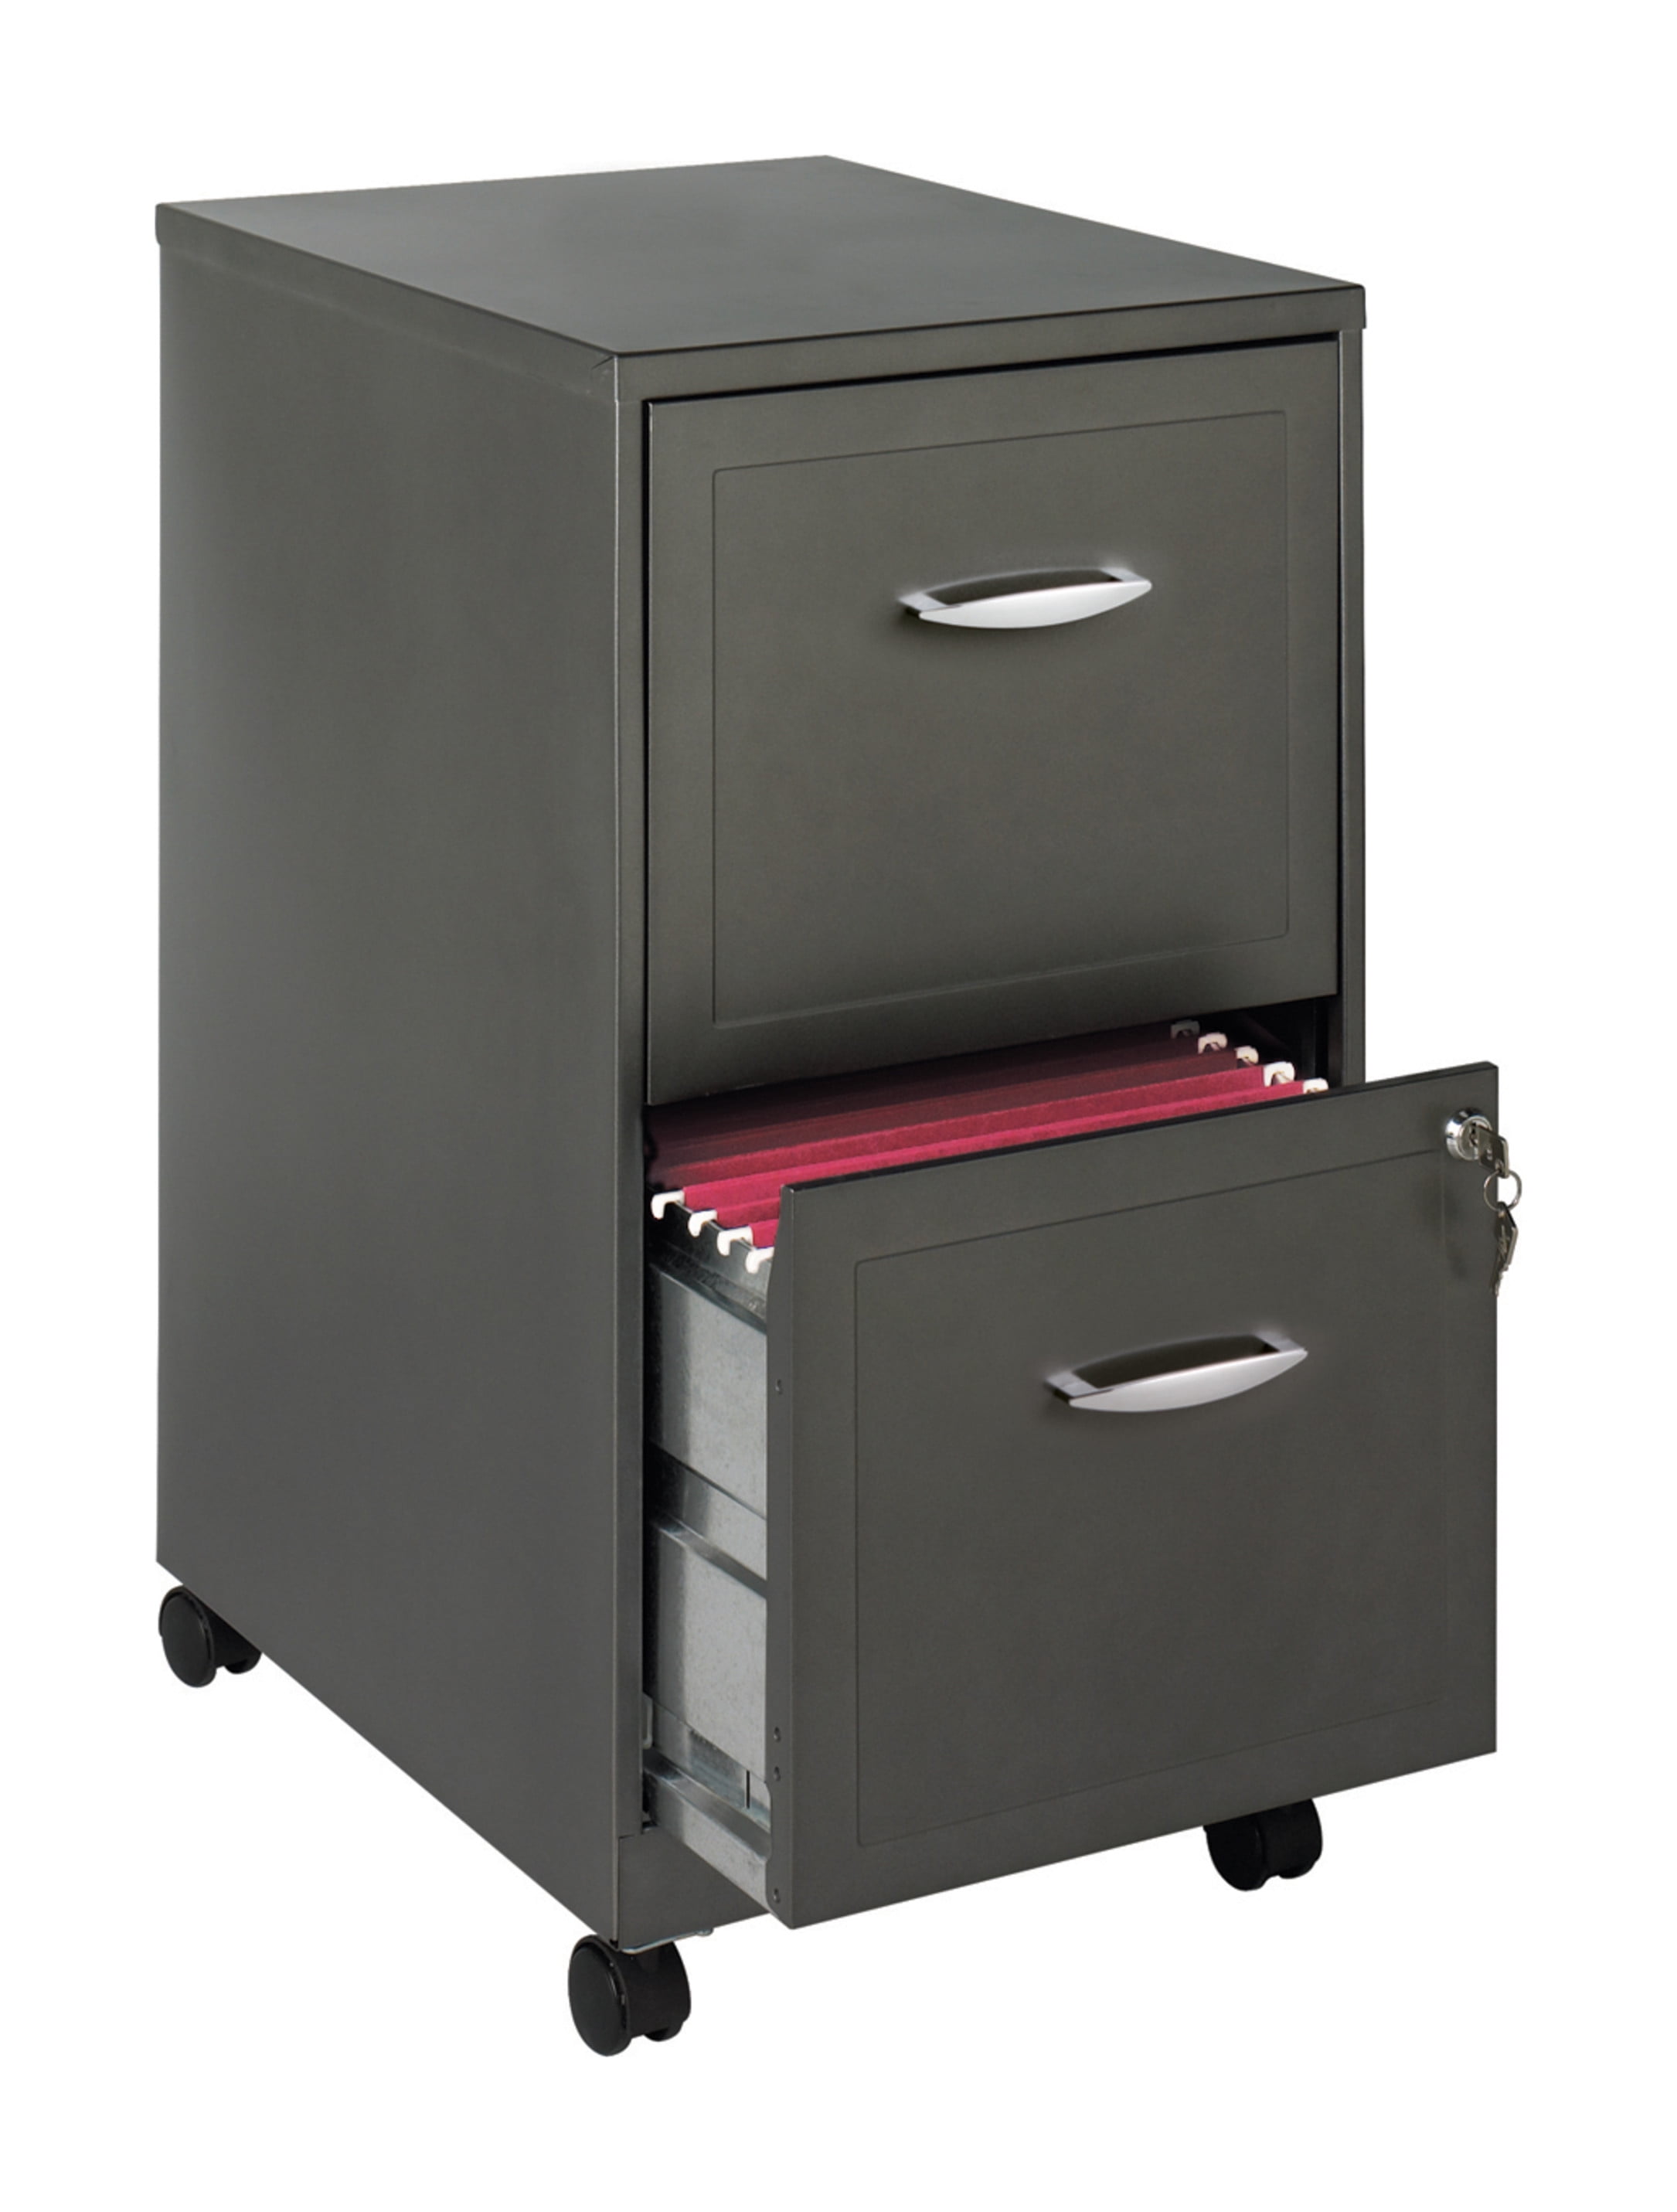 Lorell Space Solutions 18" 2 Drawer Mobile Vertical File Cabinet in Silver - image 15 of 15